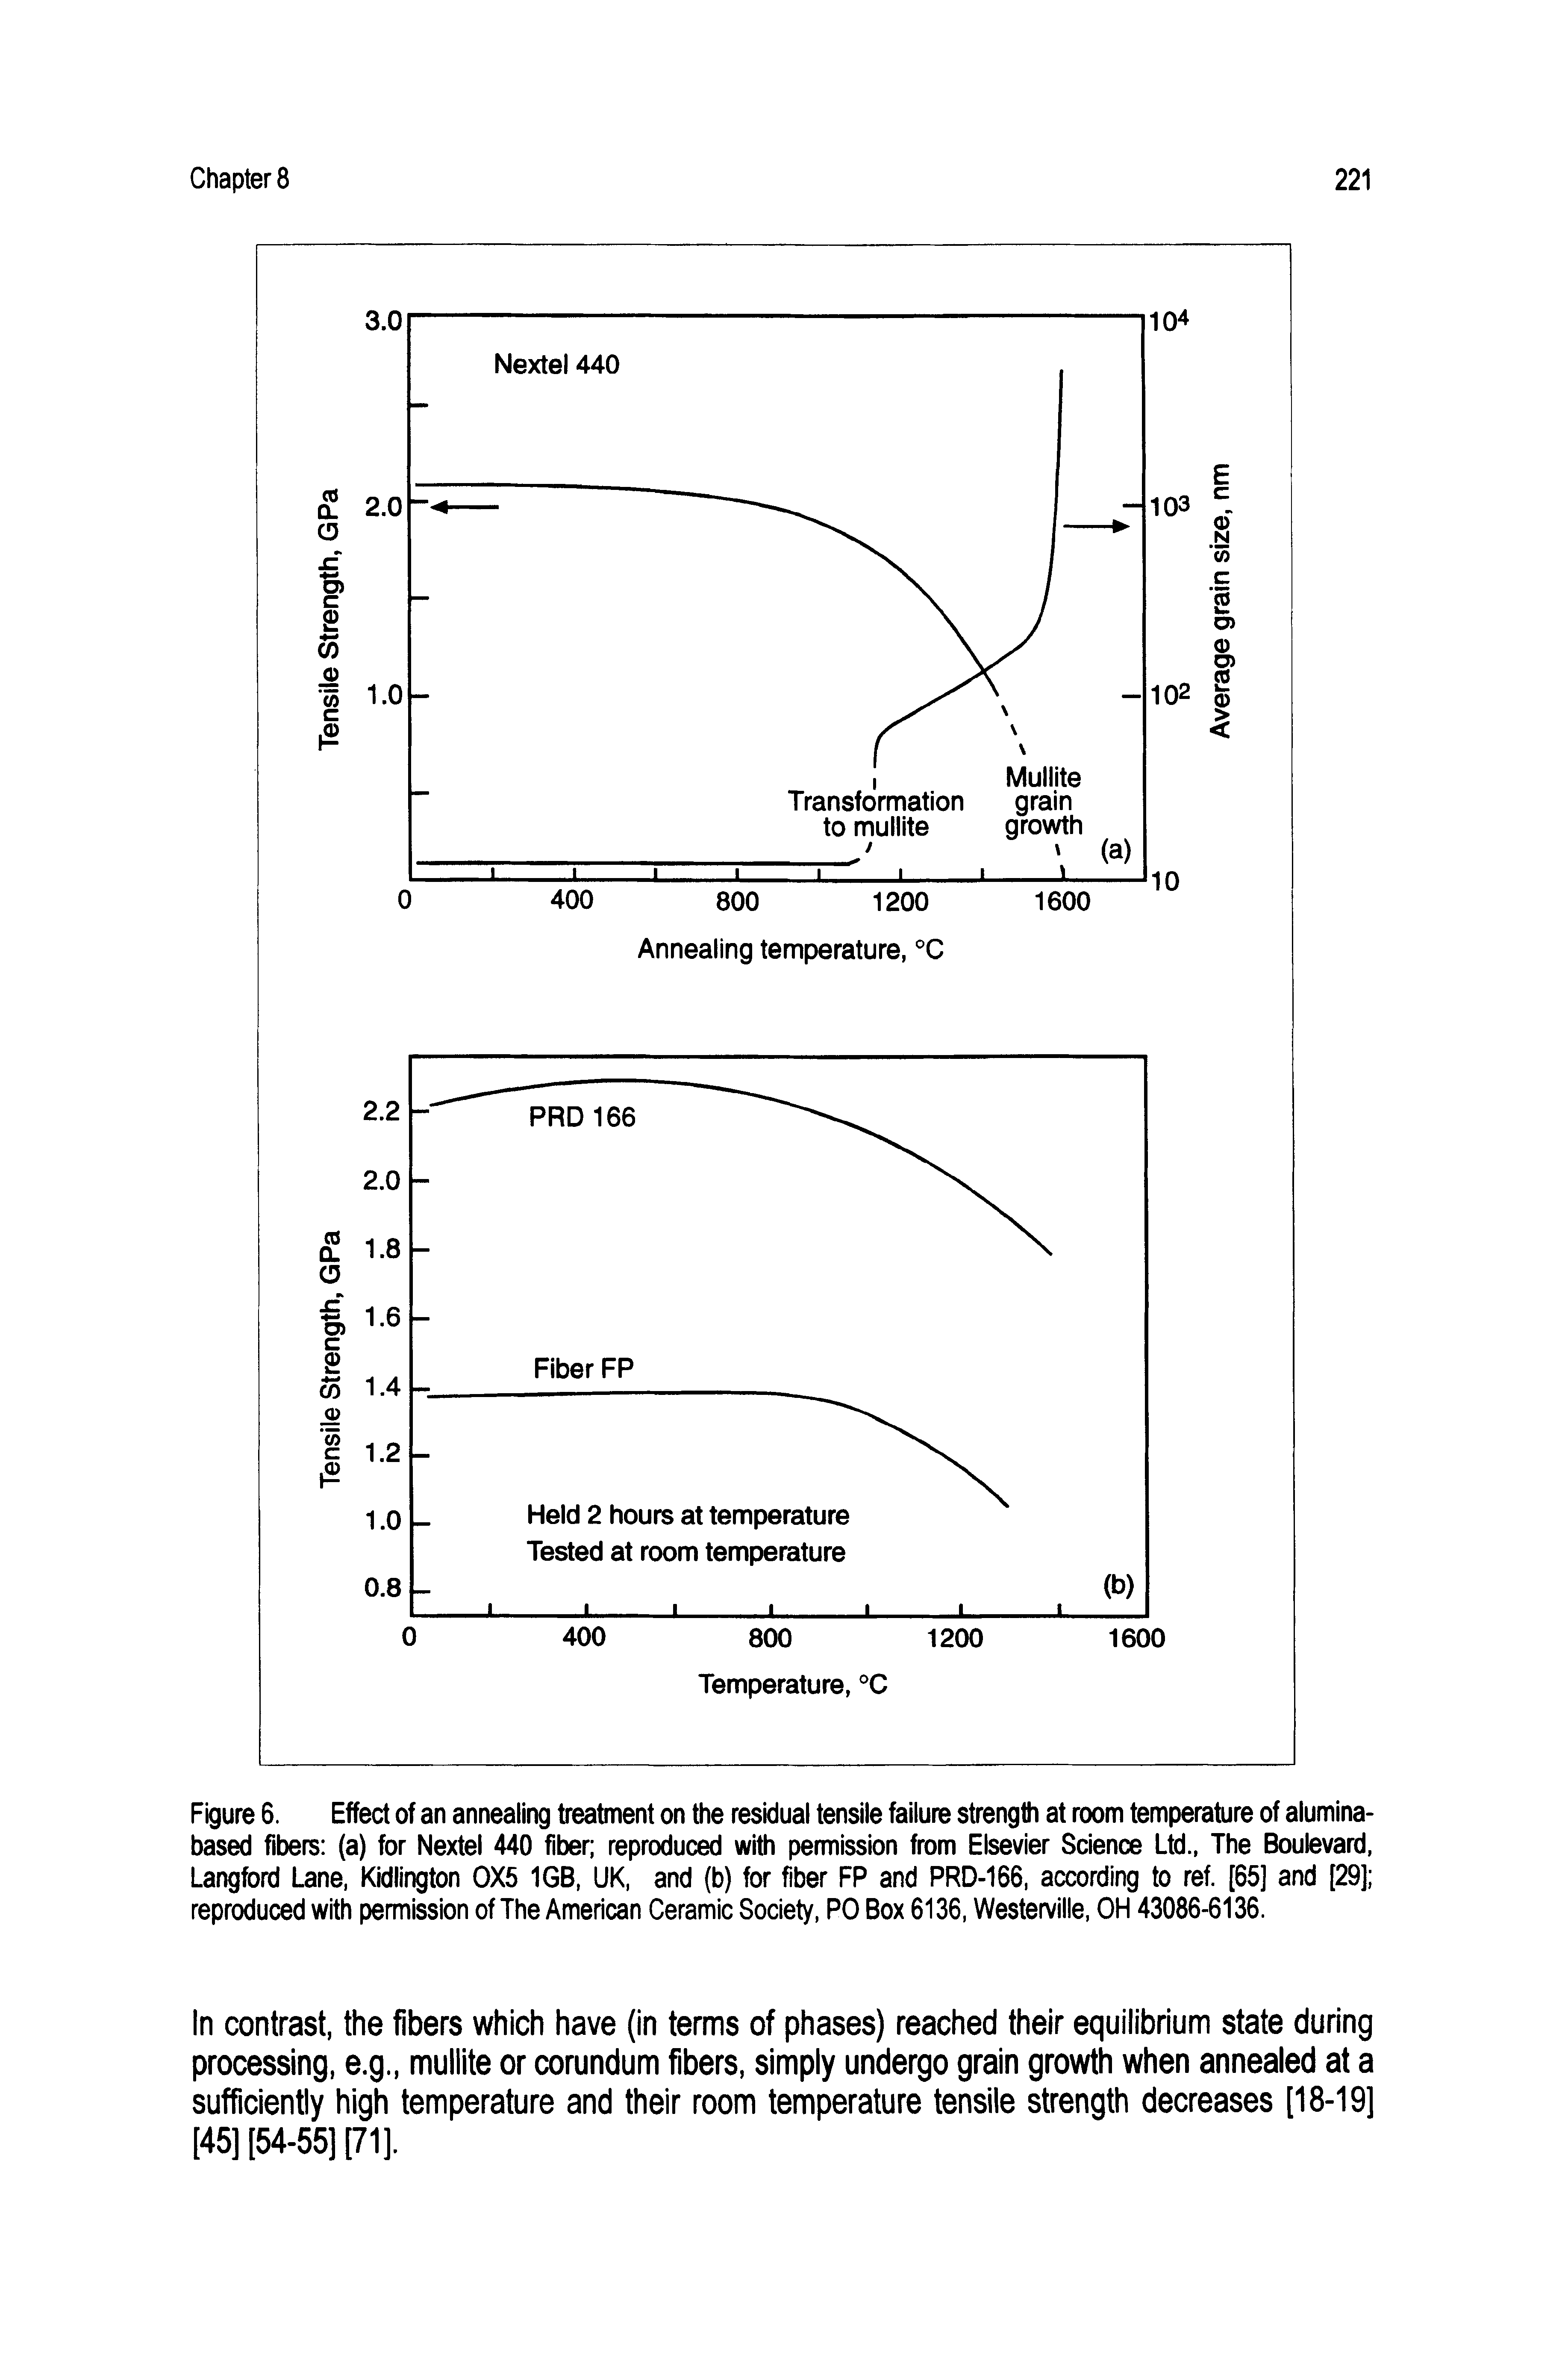 Figure 6. Effect of an annealing treatment on the residual tensile failure strength at room temperature of alumina-based fibers (a) for Nextel 440 fiber reproduced with permission from Elsevier Science Ltd.. The Boulevard, Langford Lane, Kidlirigton 0X5 1GB, UK, and (b) for fiber FP and PRD-166, according to ref. [65] and [29] reproduced with permission of The American Ceramic Society, PO Box 6136, Westerville, OH 43086-6136.